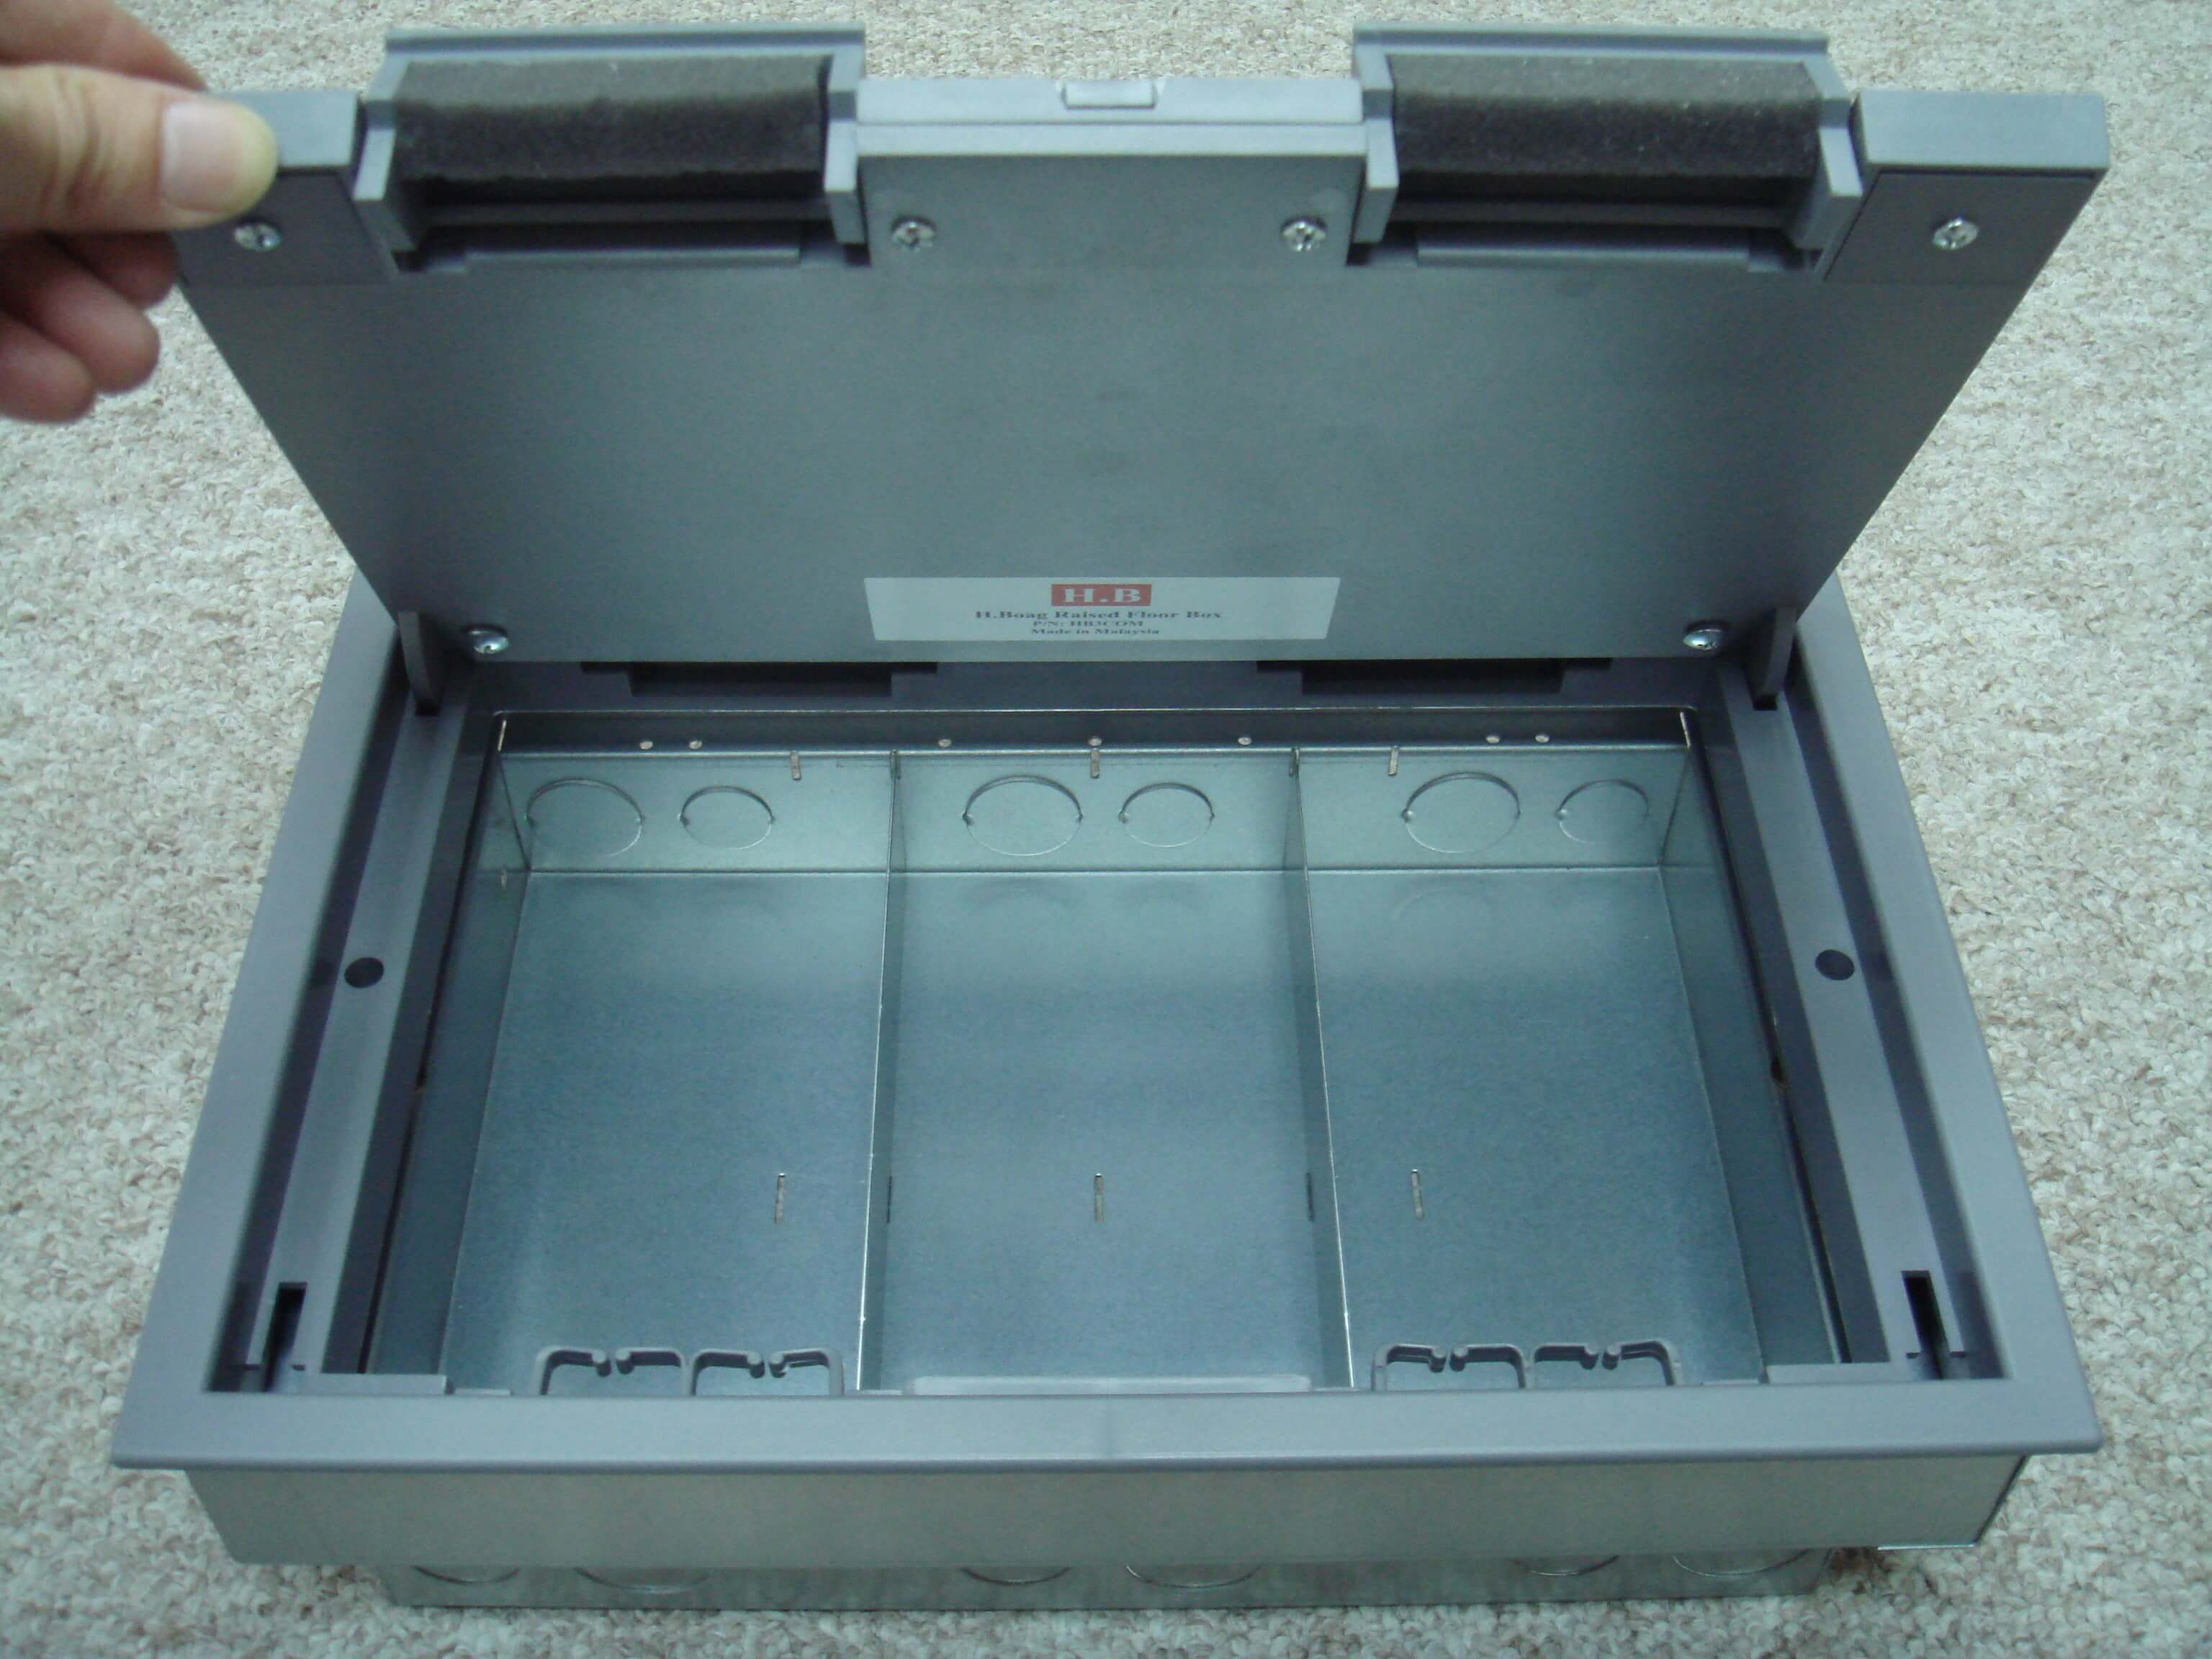 H.Boag Raised Floor Box (3 Compartment) without Accessories